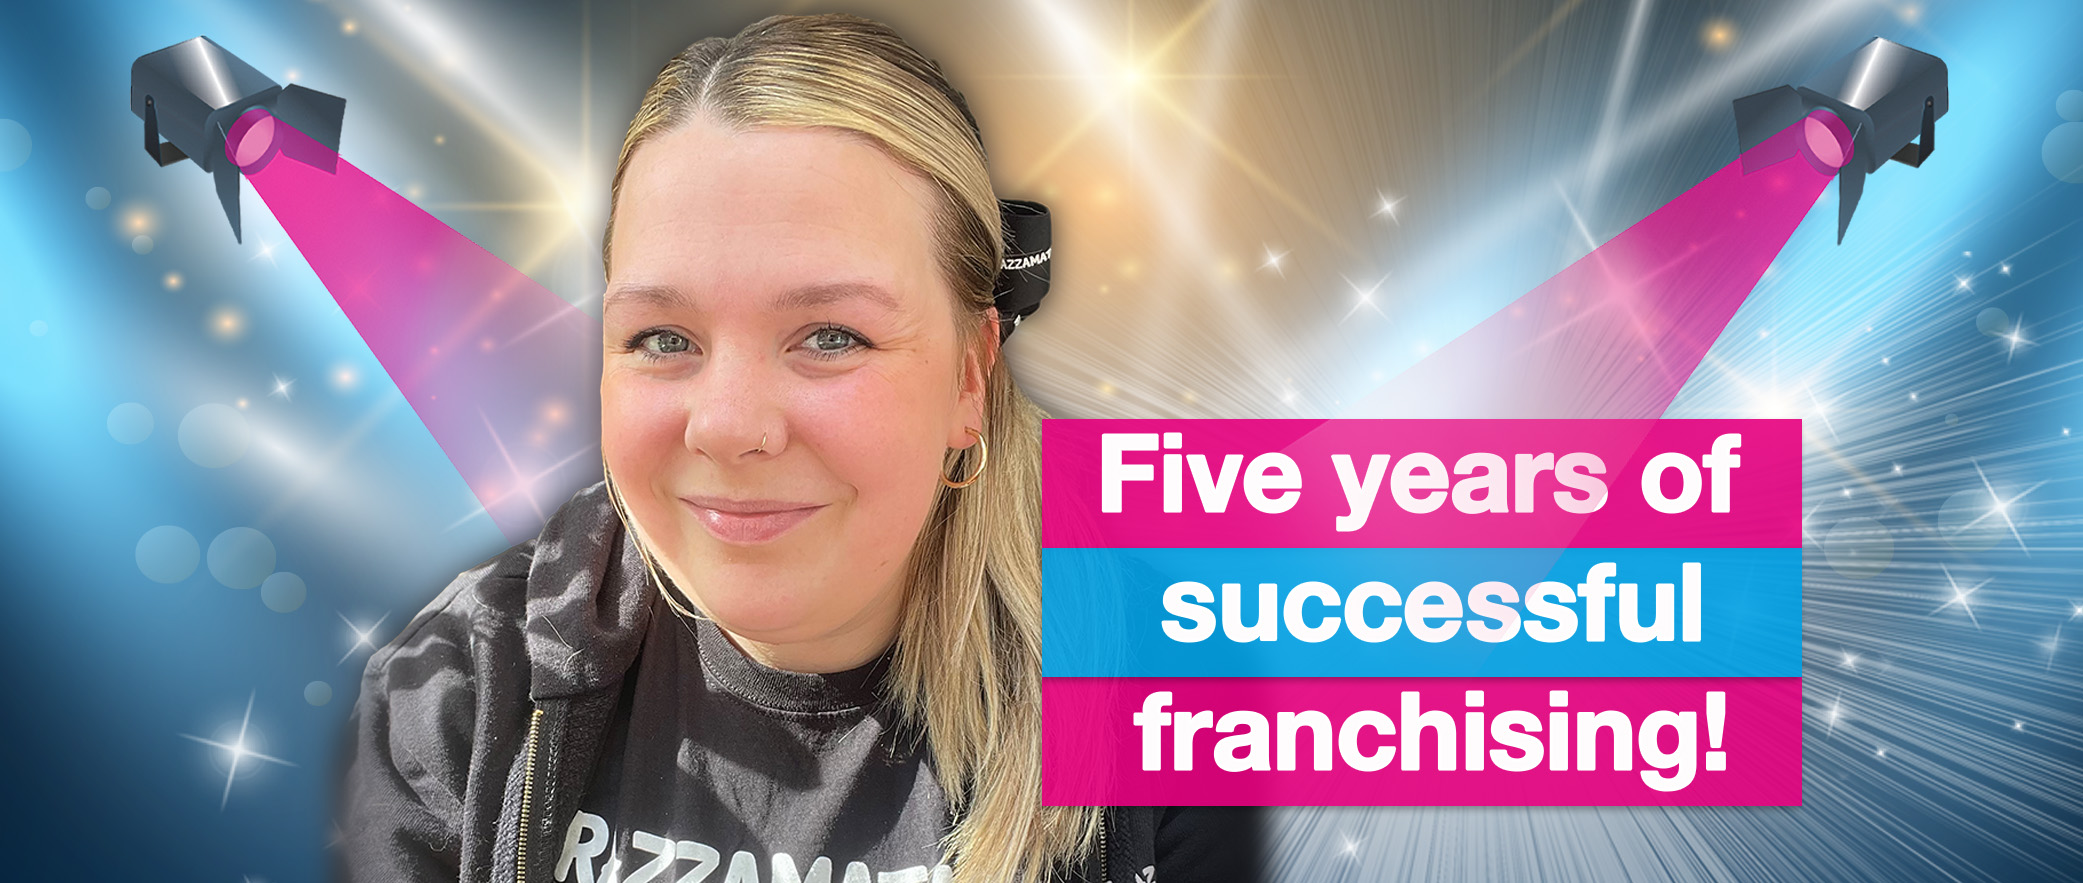 Five years of successful franchising!